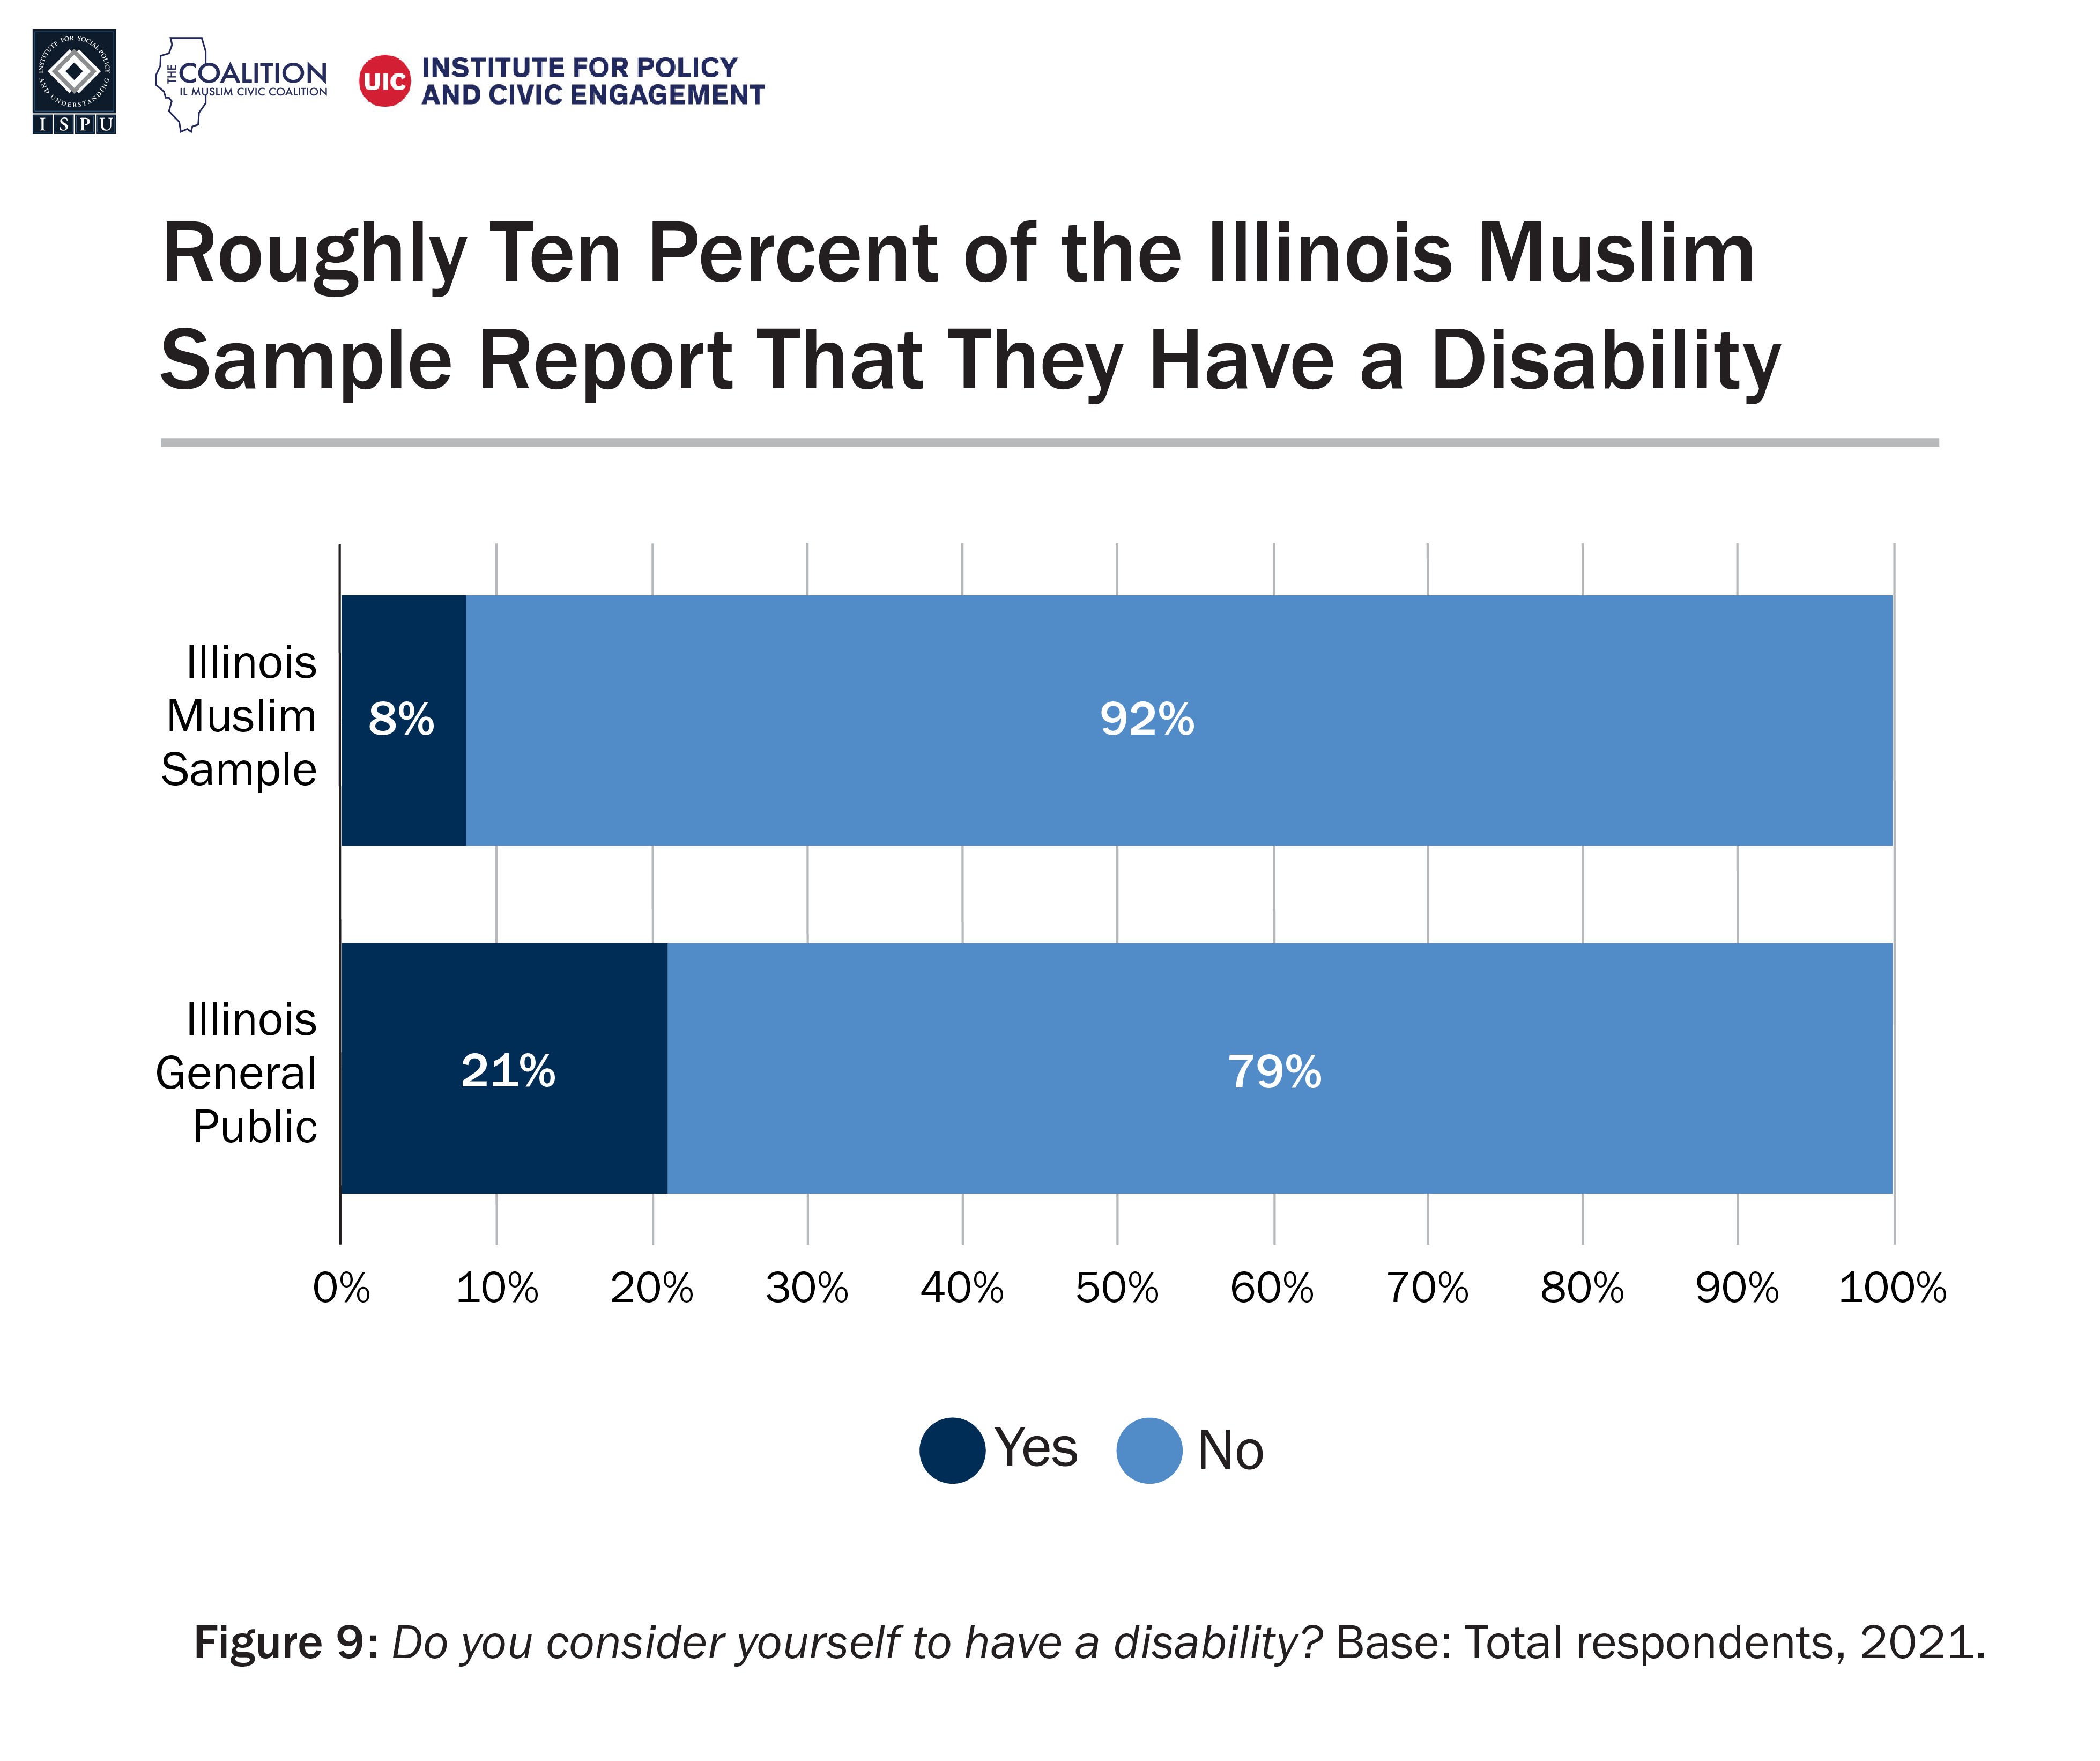 A bar graph showing the proportion of the Illinois Muslim sample and Illinois general public who report having a disability